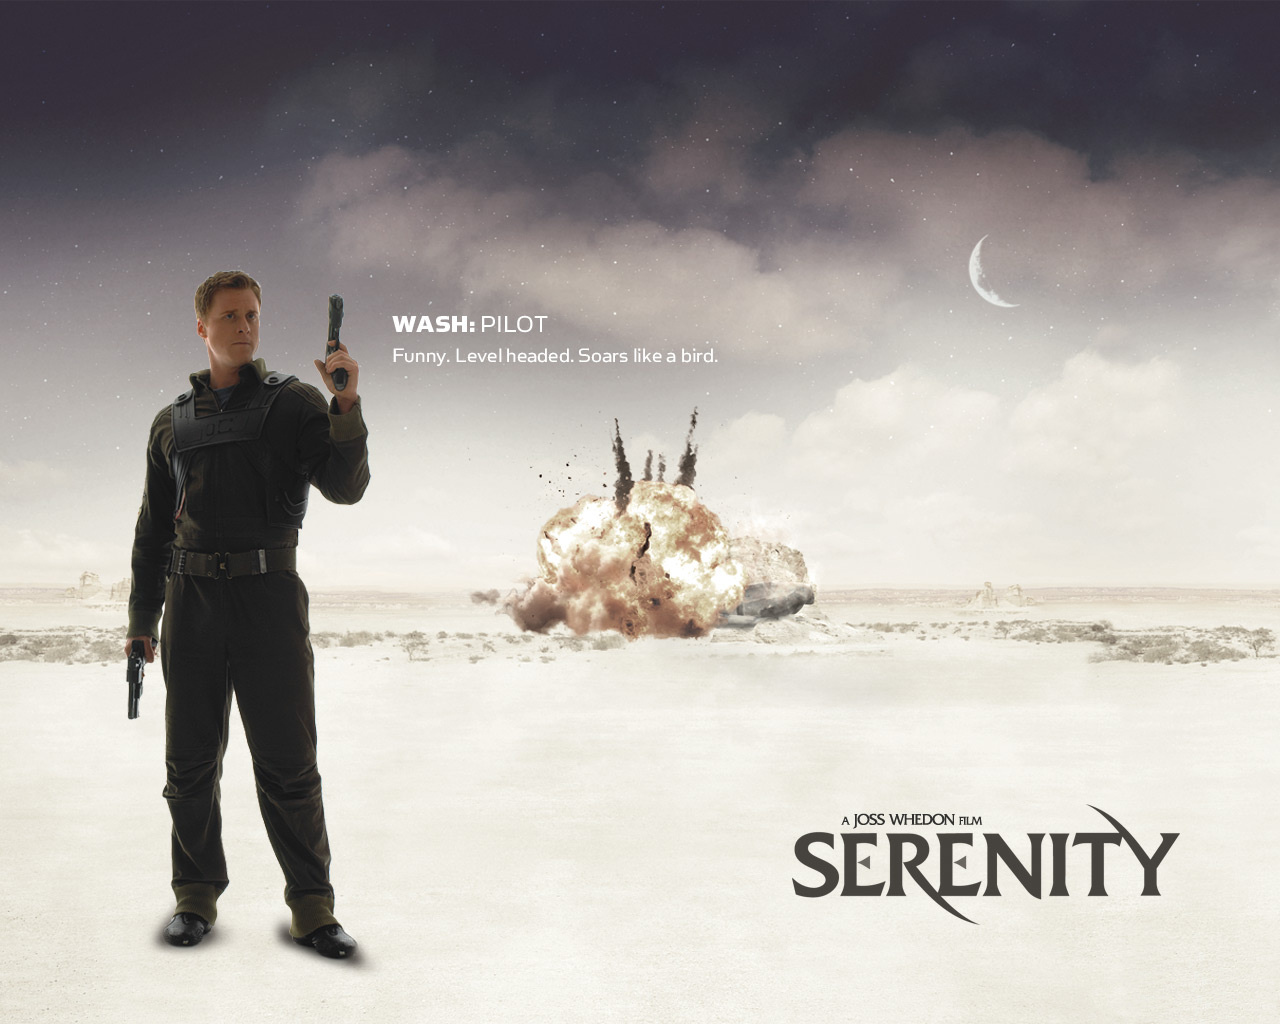 Firefly Serenity Wallpaper Table